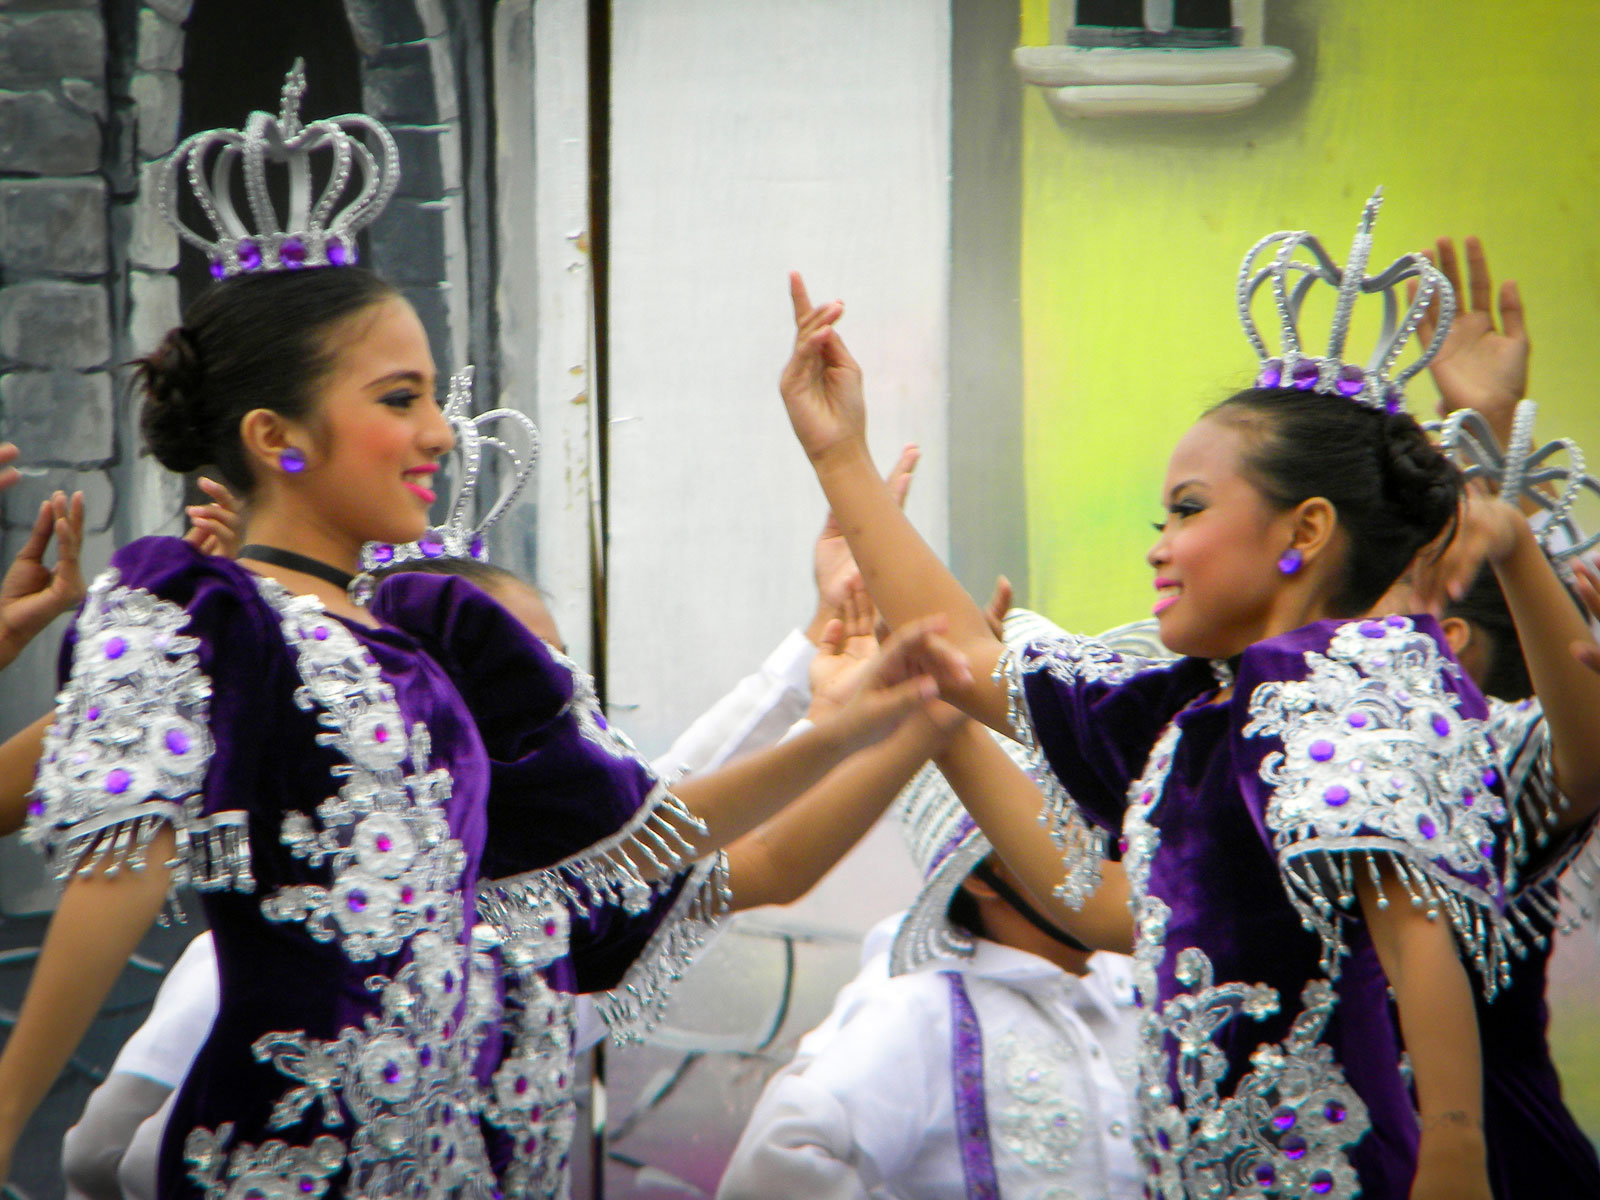 The contingent from the Talisay City Central School places first in the Sinulog sa Kabataan-Lalawigan 2014 elementary division.